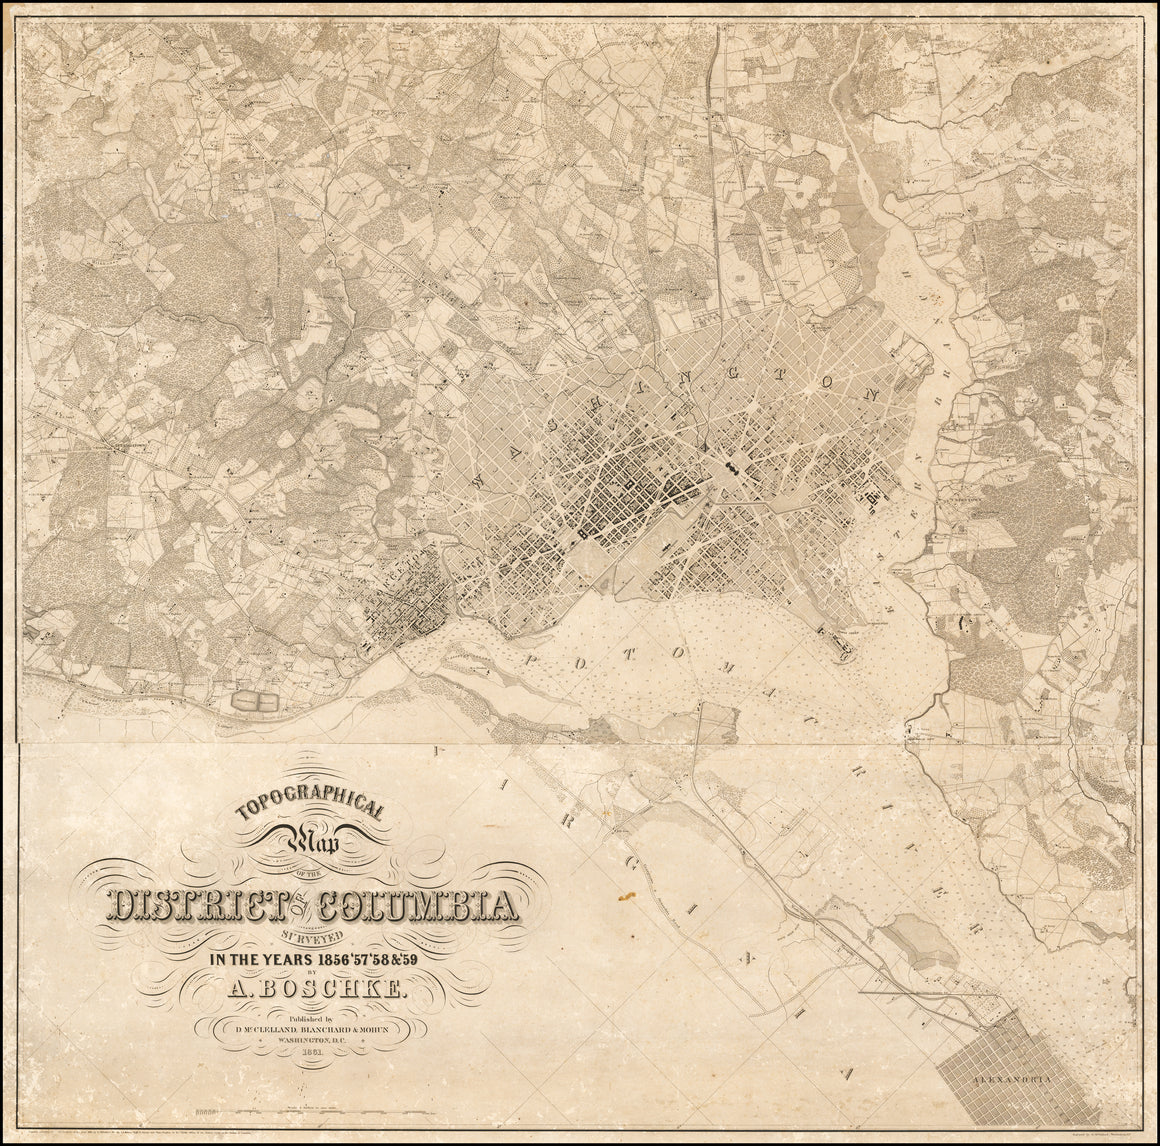 1861 "Topographical Map of the District of Columbia Surveyed in the Years 1856 '57 '58 & '59" by Albert Boschke